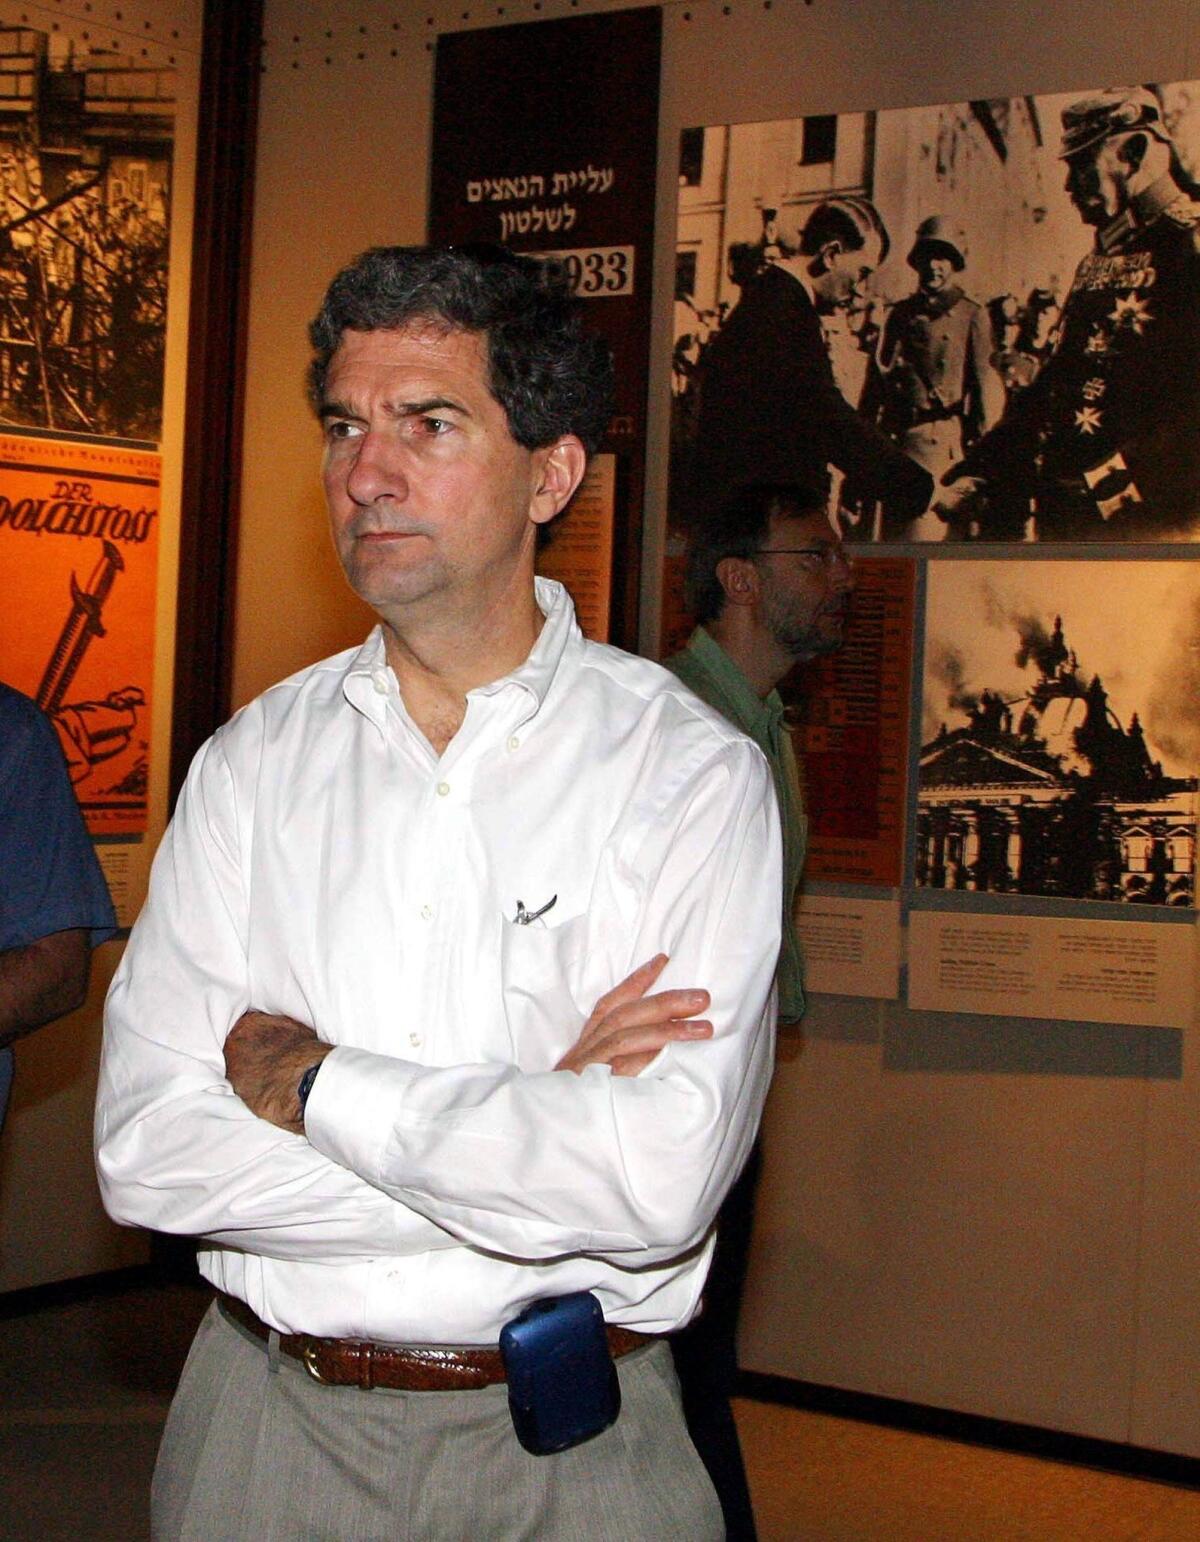 Cameron Kerry during a 2004 tour of the Yad Vashem Holocaust Memorial in Israel.